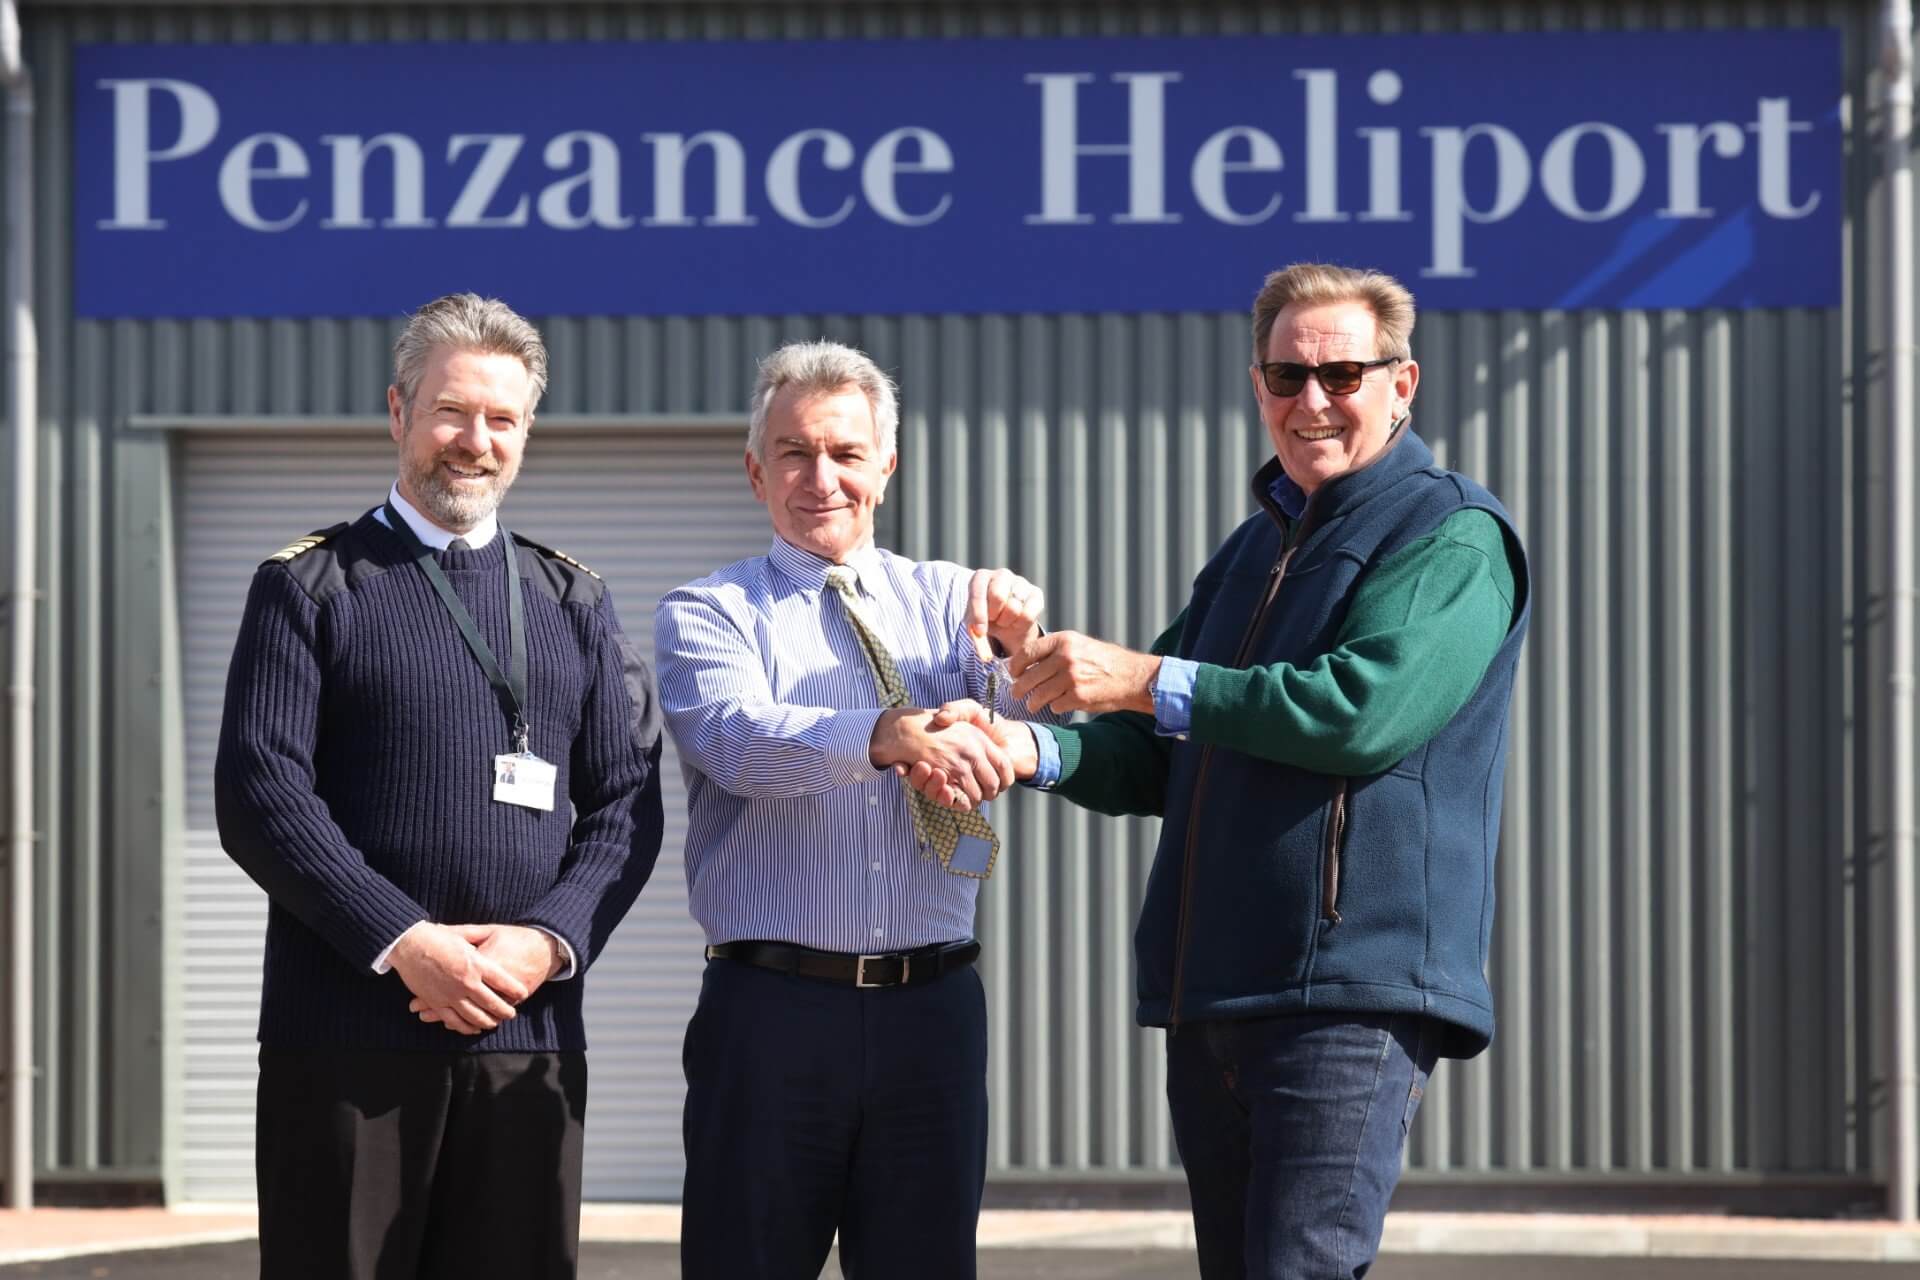 Operational control of the entire heliport was handed over to Sloane Helicopters shortly before the launch of the new scheduled service. Captain Justin Wood (GM, Penzance Helicopters), Robert Dorrien-Smith (a key investor in the Penzance Heliport facility), and Jeremy Awenat (MD, Sloane Helicopters). Greg Caygill Photo